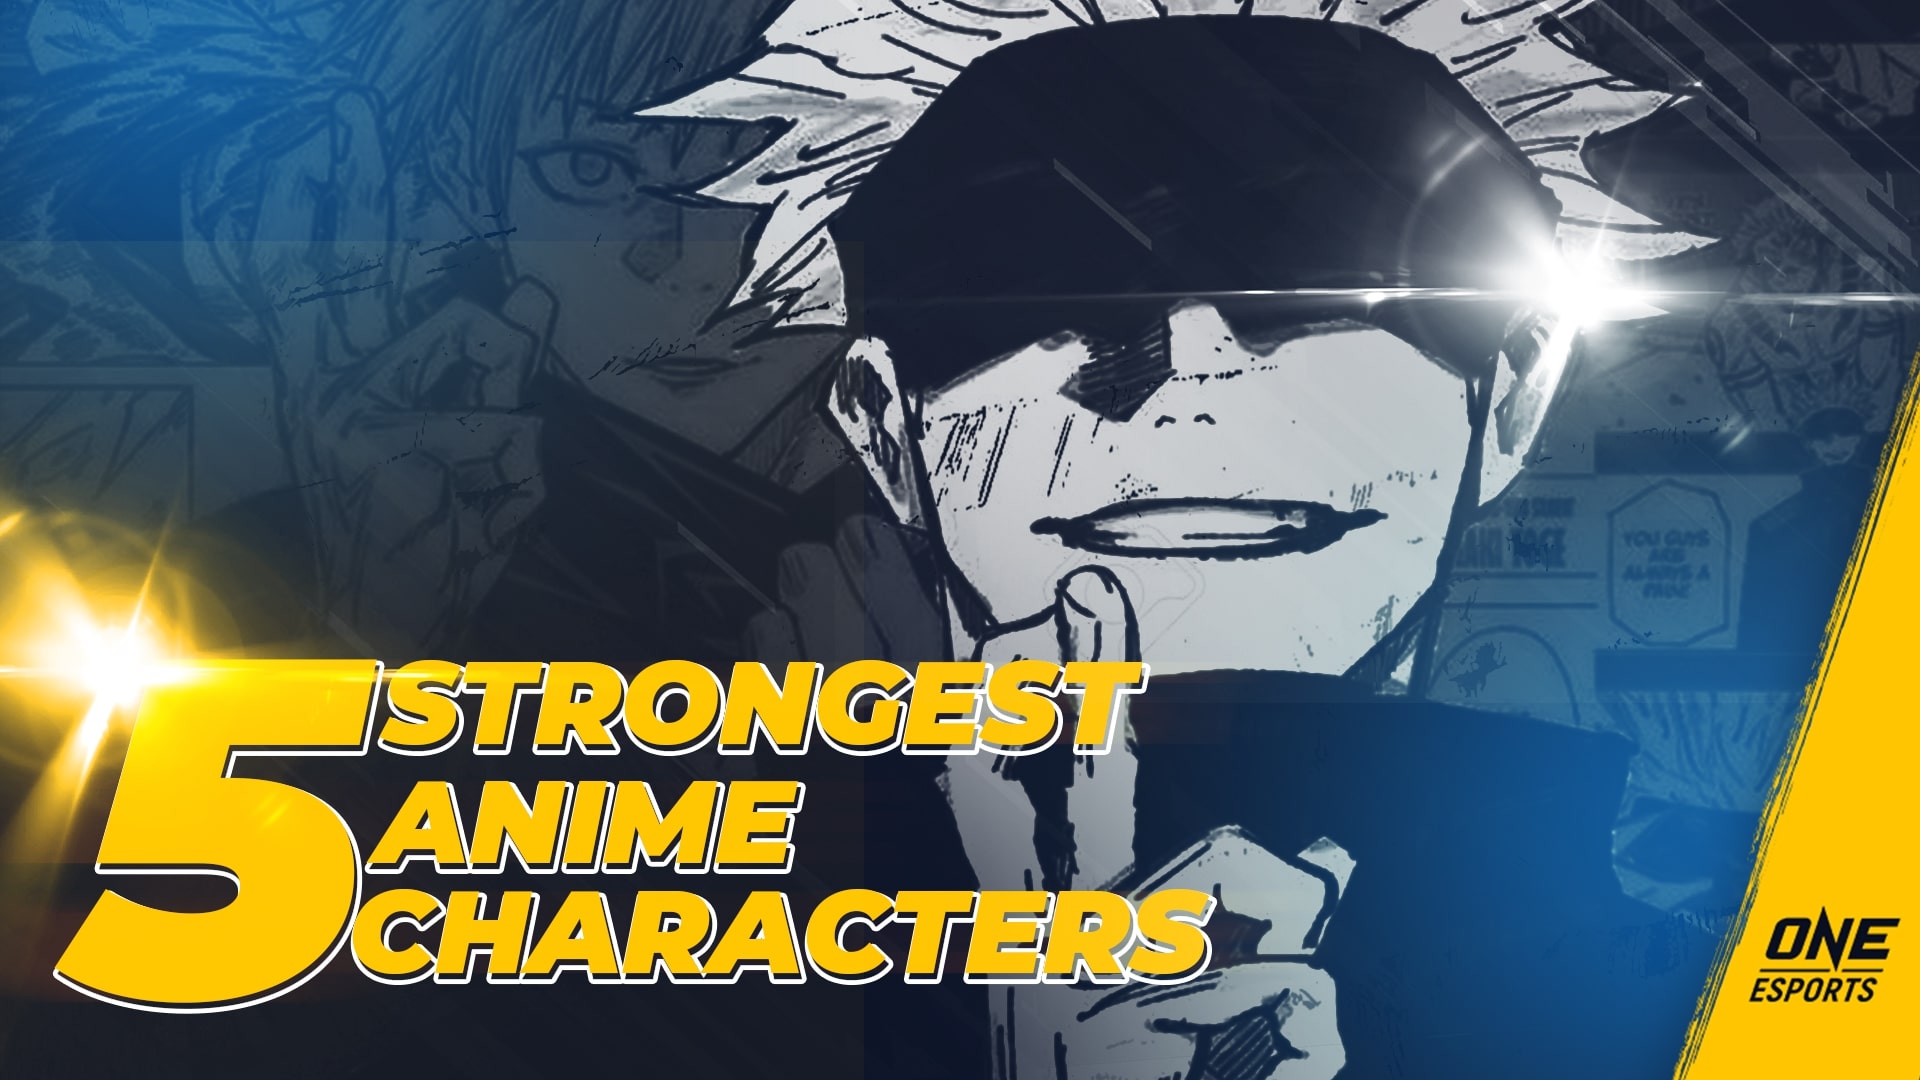 Who is the strongest anime character